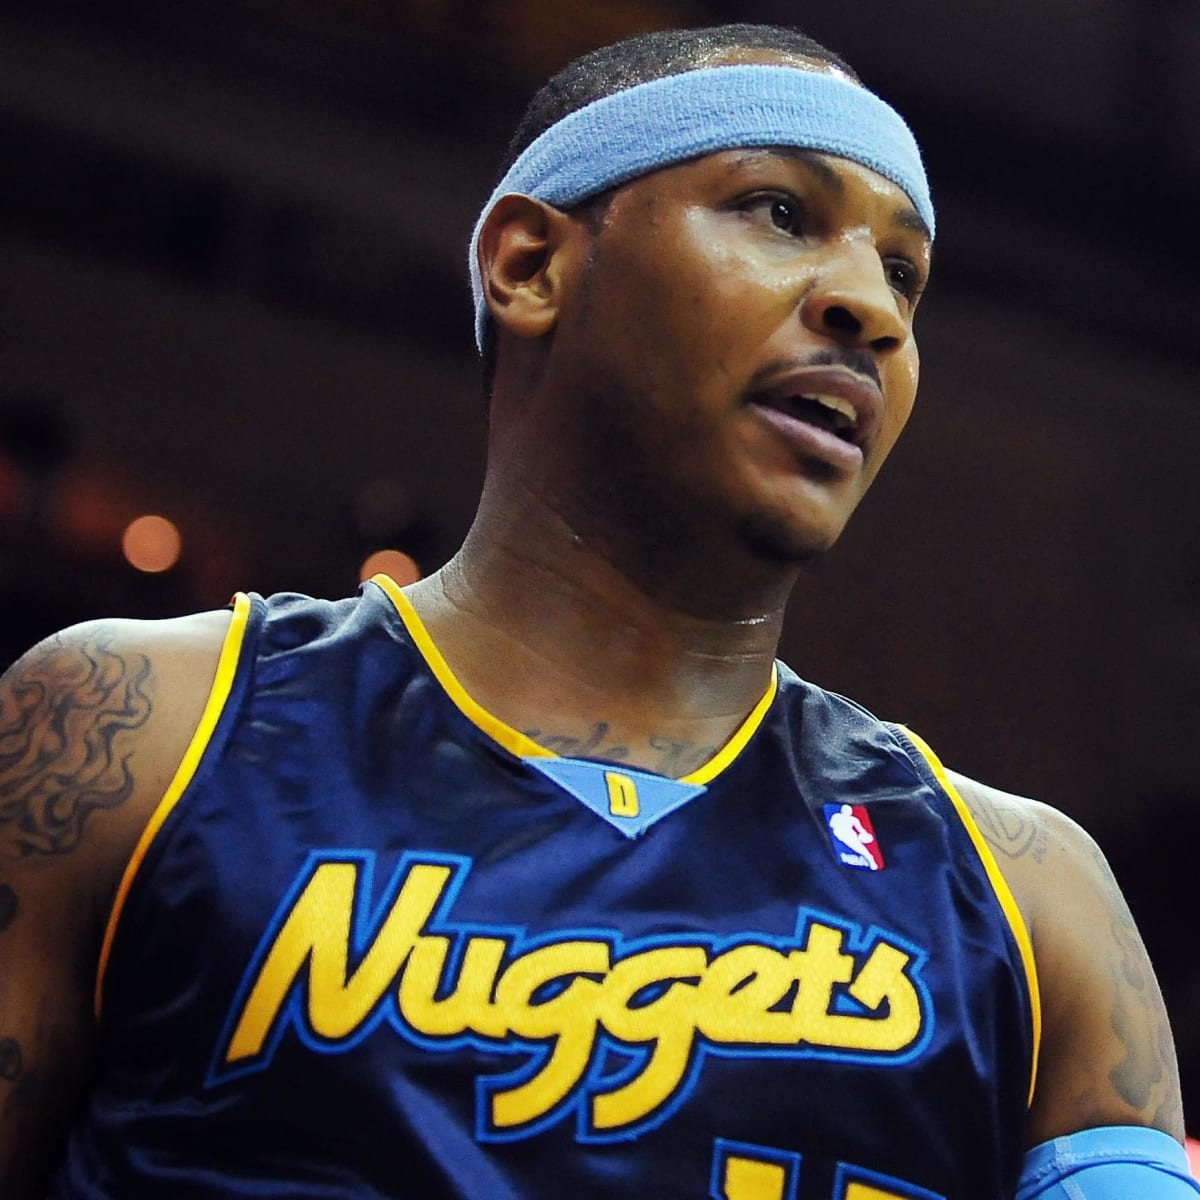 The Denver Nuggets have a decision to make between Carmelo Anthony